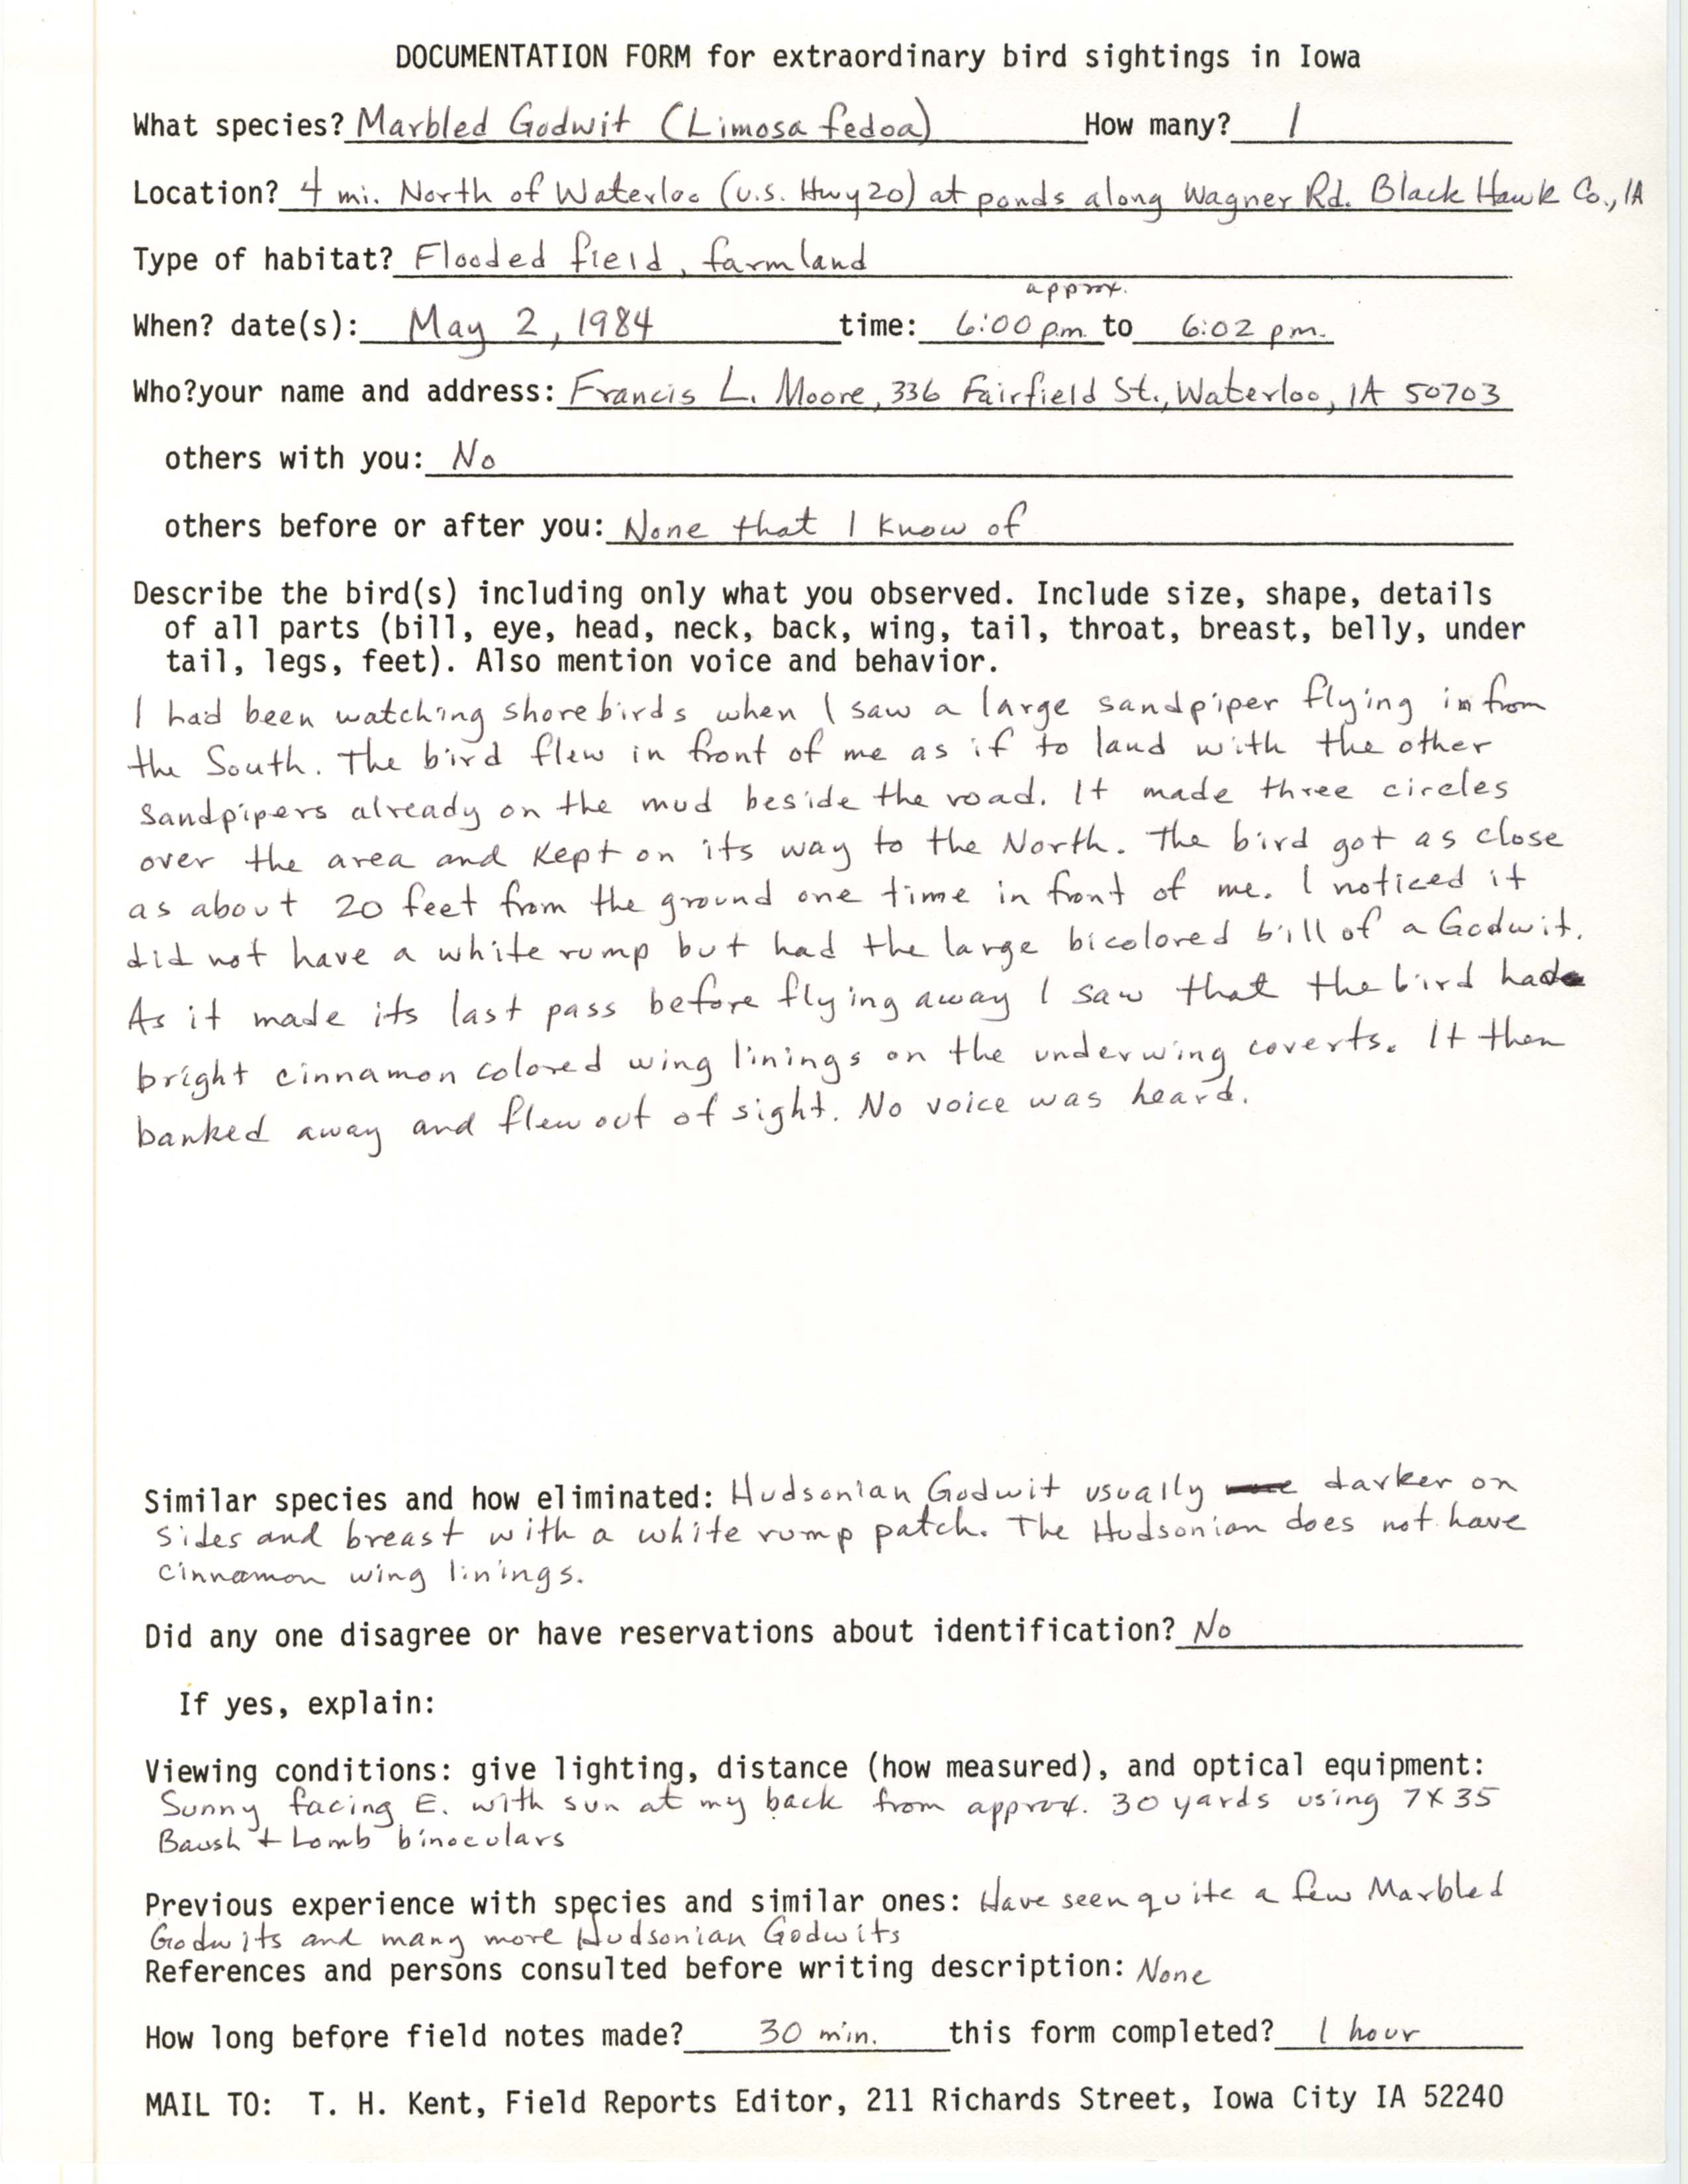 Rare bird documentation form for Marbled Godwit north of Waterloo, 1984